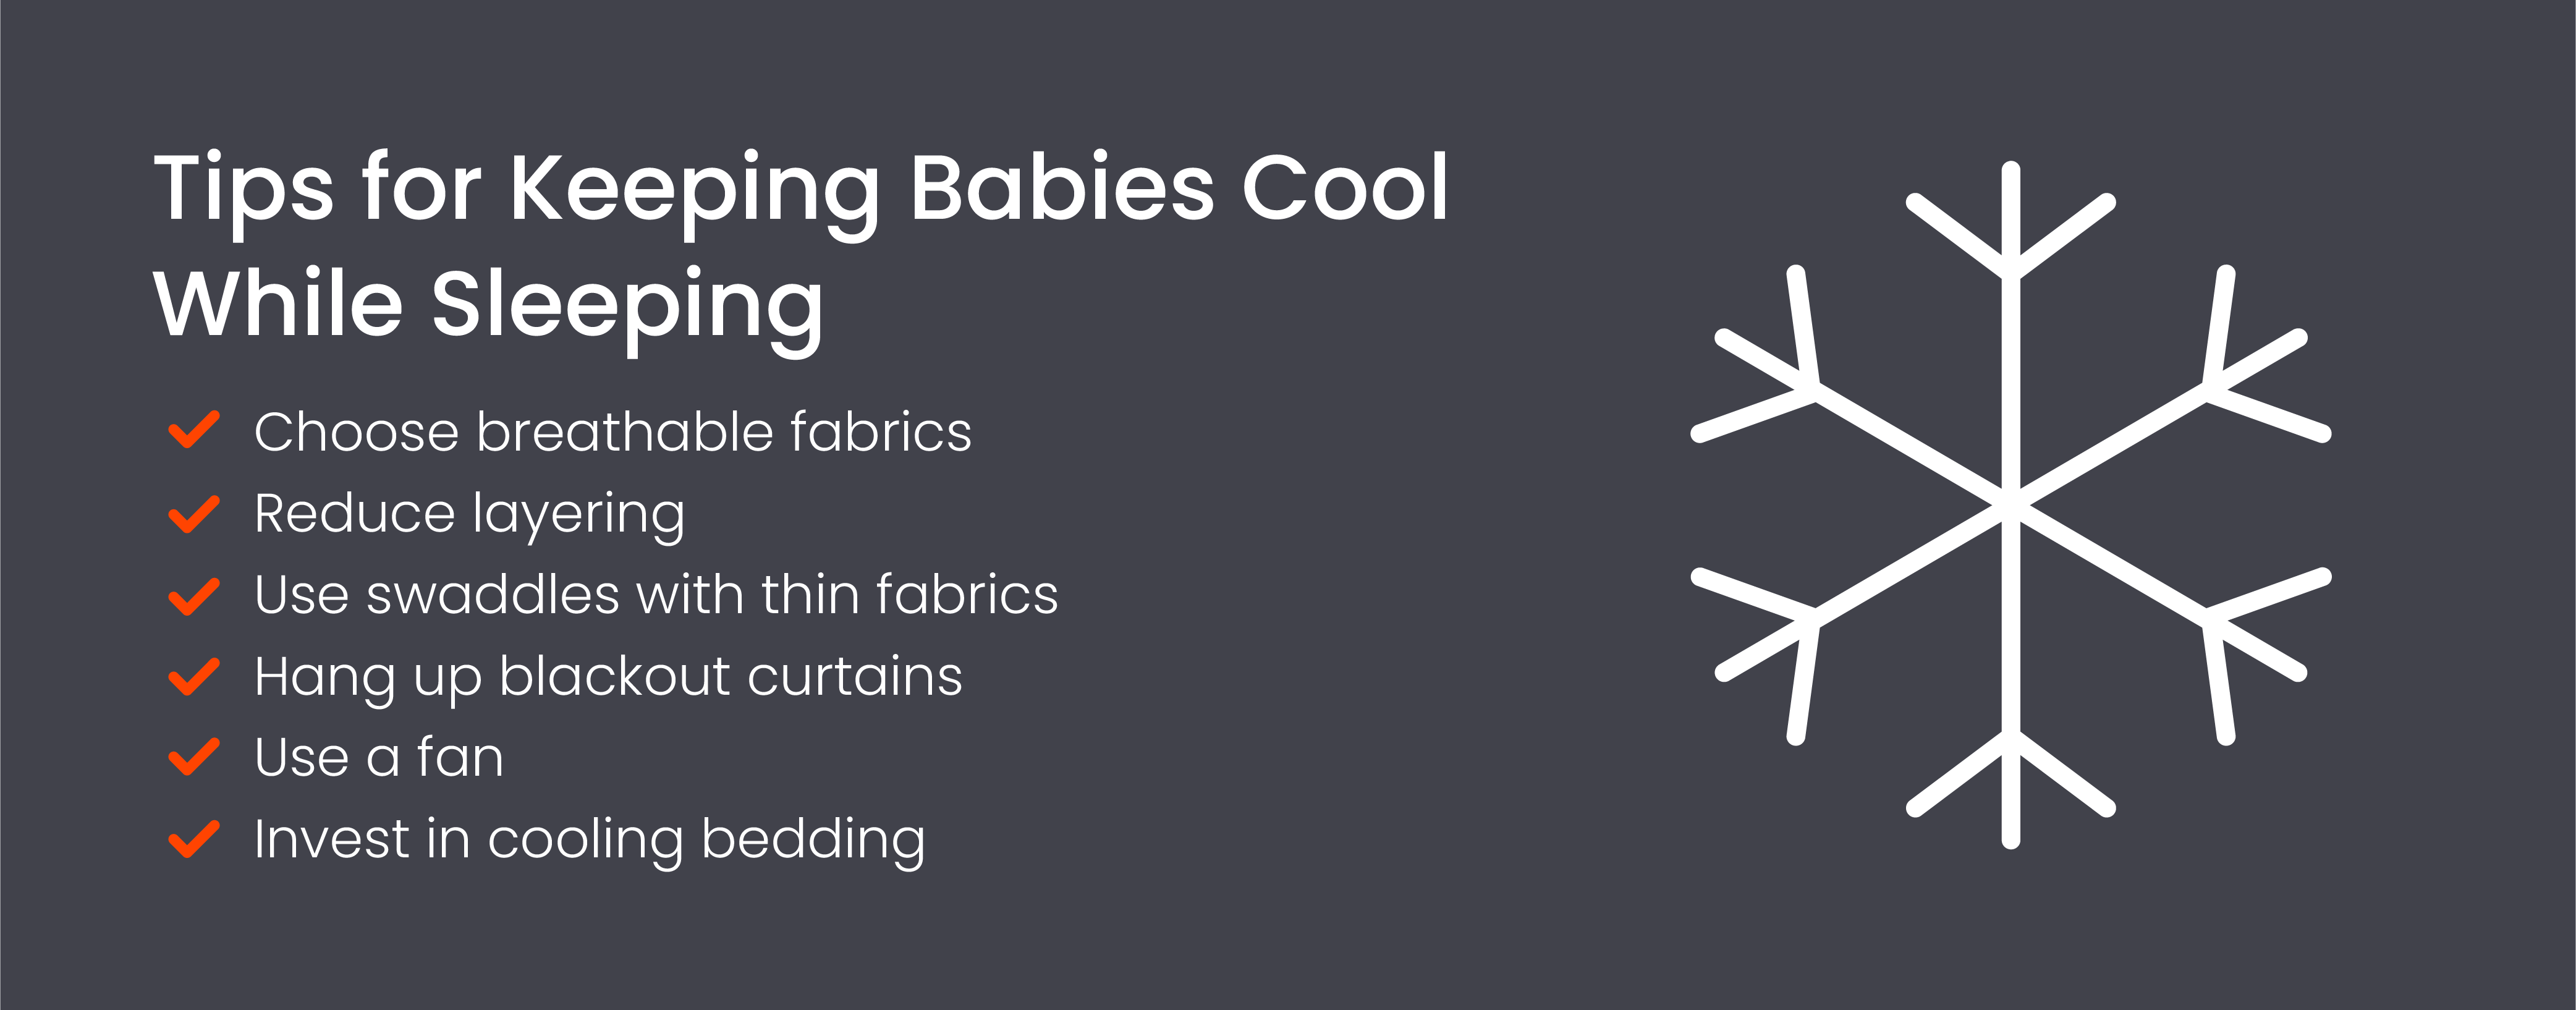 Tips for keeping babies cool while sleeping